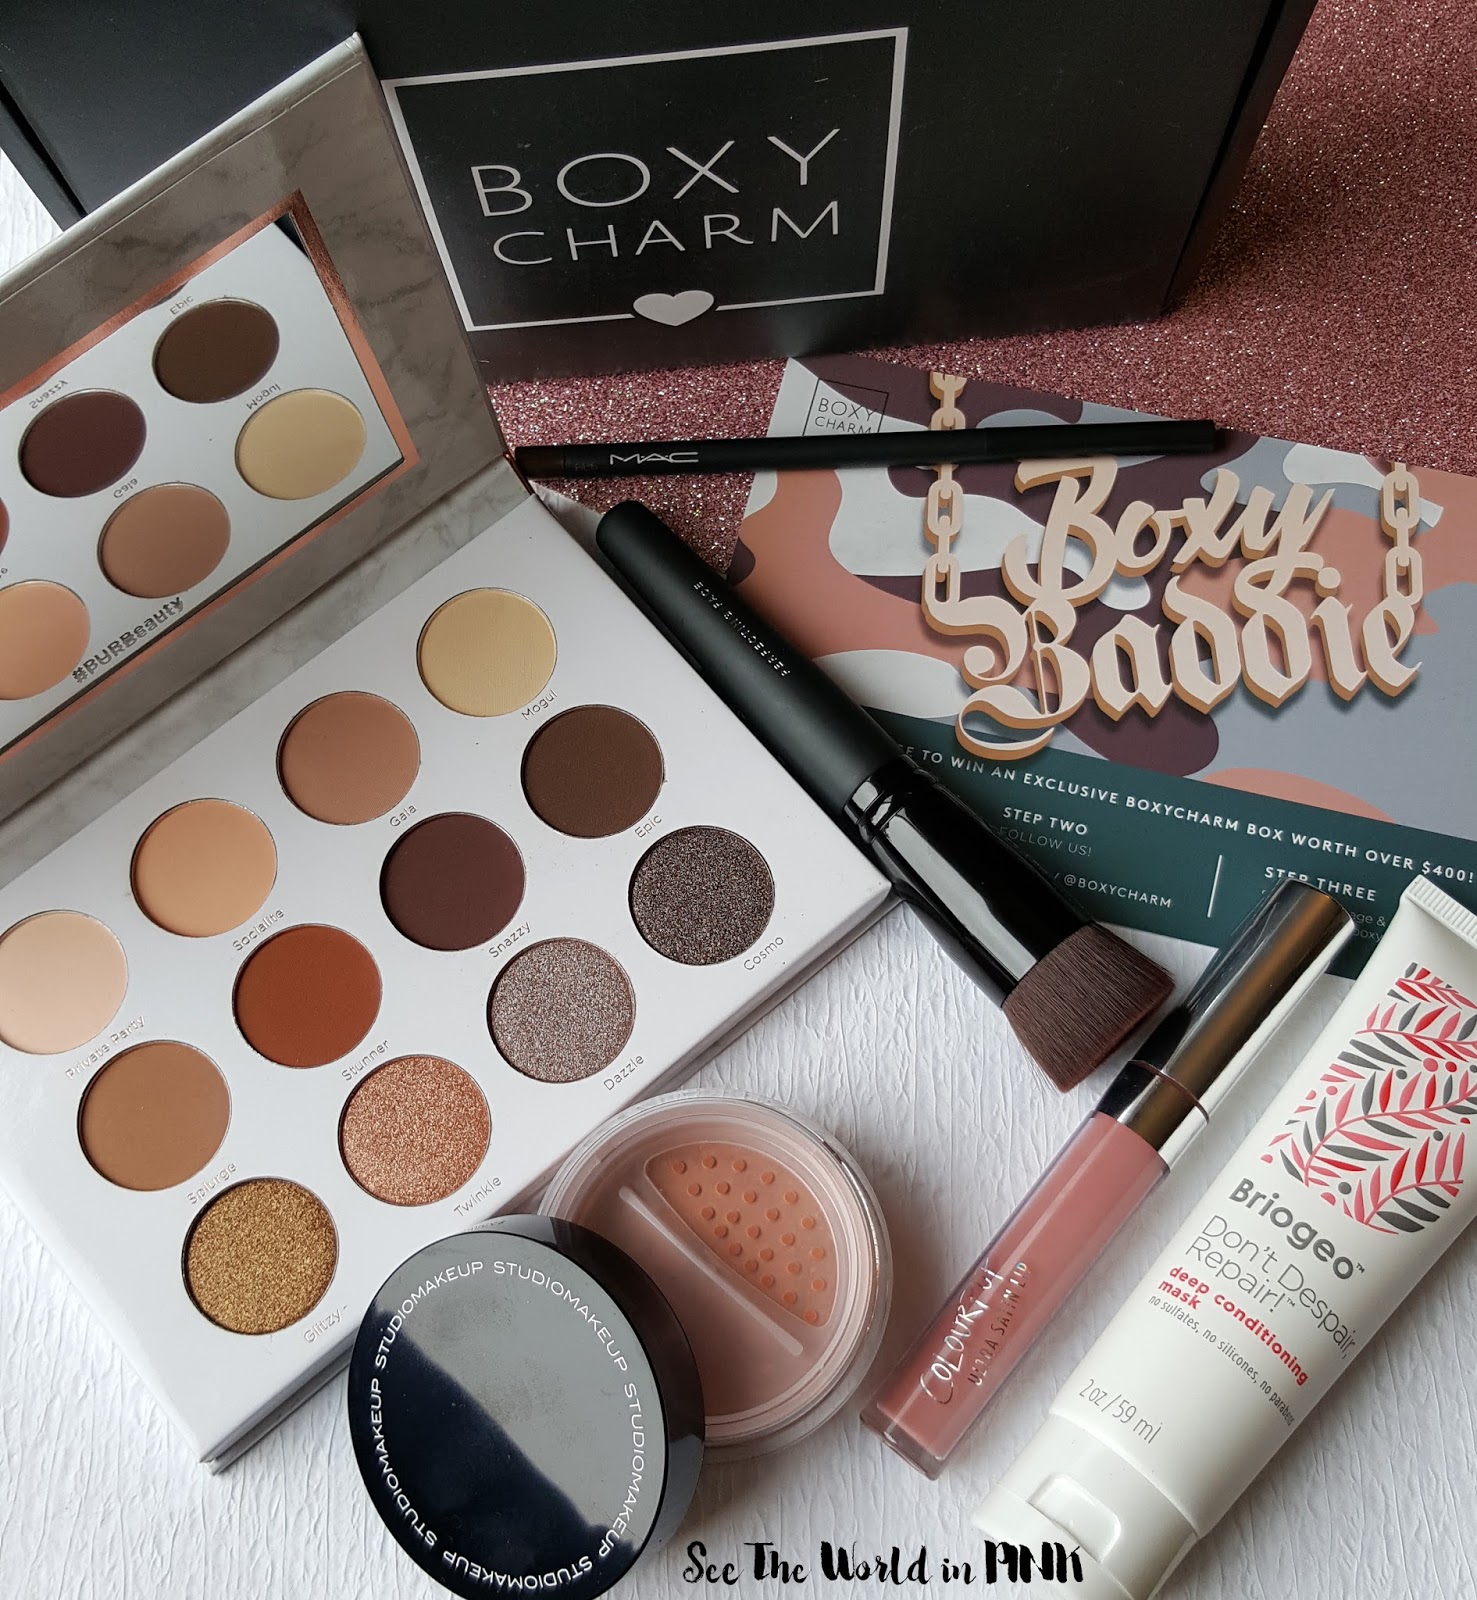 September 2017 - Boxycharm Unboxing, Review, Swatches and Makeup Try-on! 